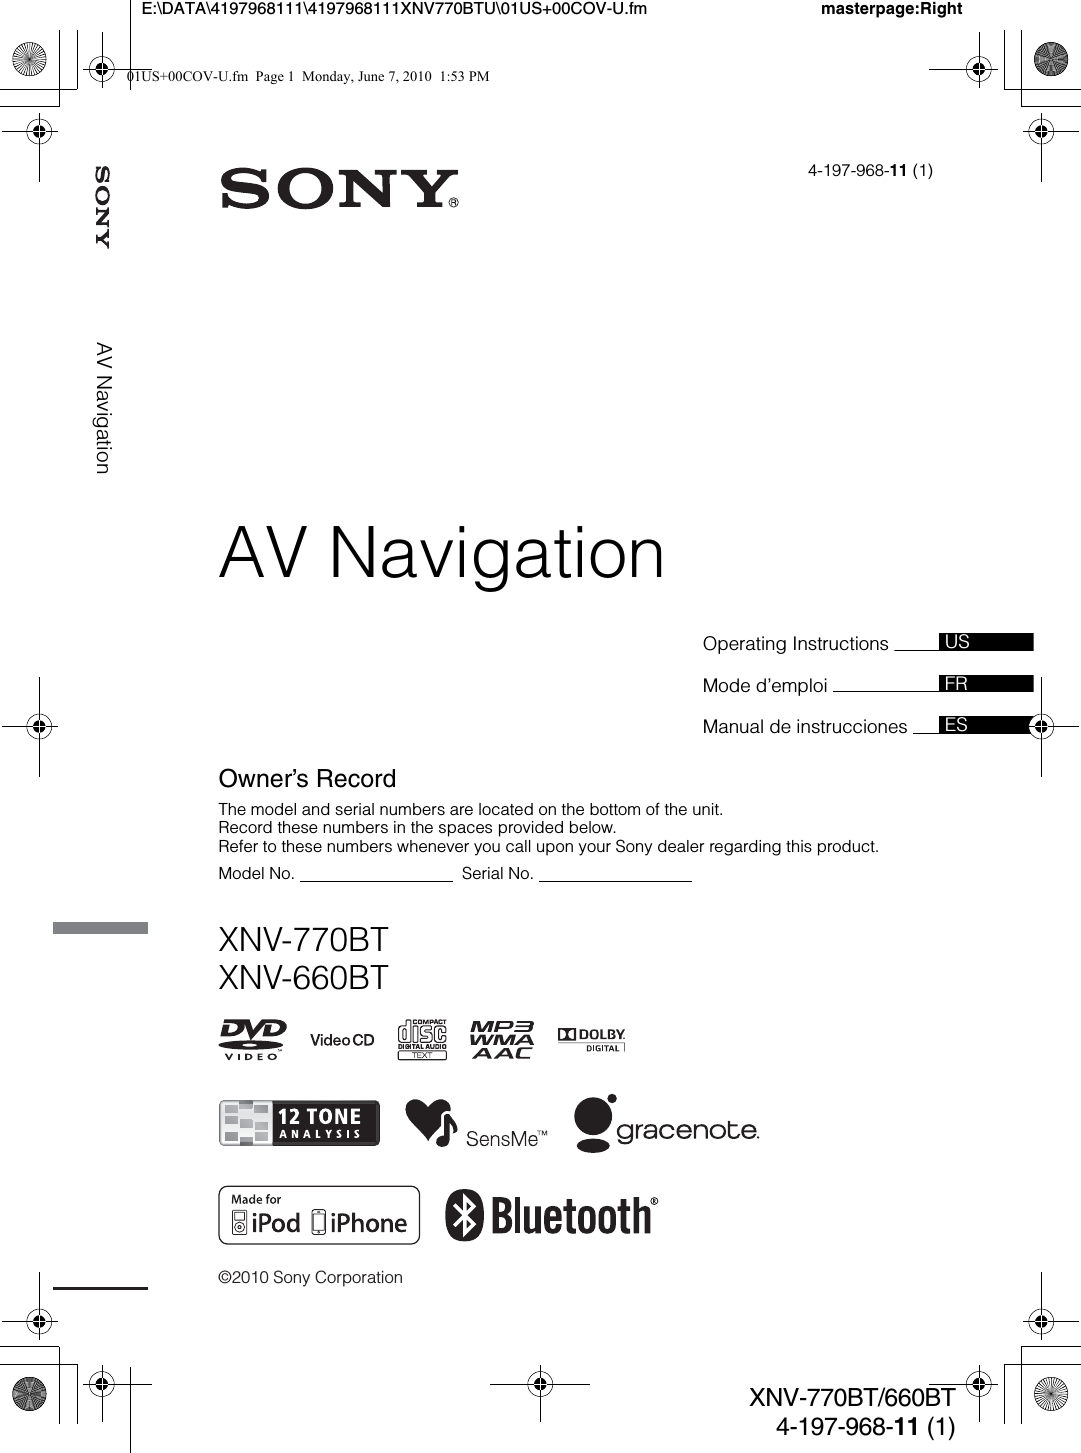 ©2010 Sony CorporationOperating Instructions Mode d’emploi Manual de instrucciones 4-197-968-11 (1)XNV-770BTXNV-660BTUSFRESOwner’s RecordThe model and serial numbers are located on the bottom of the unit.Record these numbers in the spaces provided below.Refer to these numbers whenever you call upon your Sony dealer regarding this product.Model No.                                    Serial No.                                  masterpage:RightE:\DATA\4197968111\4197968111XNV770BTU\01US+00COV-U.fmXNV-770BT/660BT4-197-968-11 (1)AV NavigationAV Navigation01US+00COV-U.fm  Page 1  Monday, June 7, 2010  1:53 PM